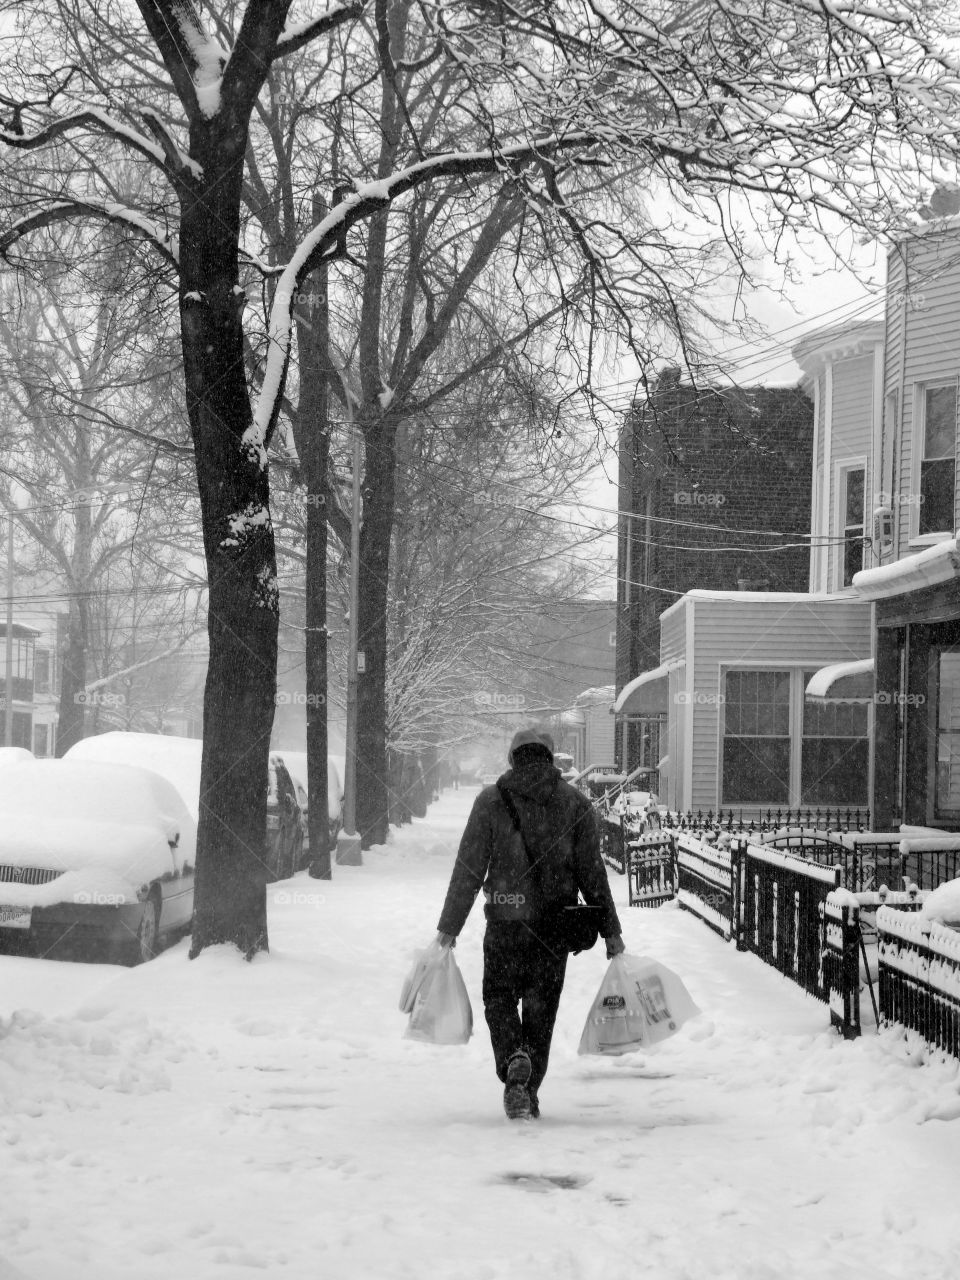 Man in snow with bags 